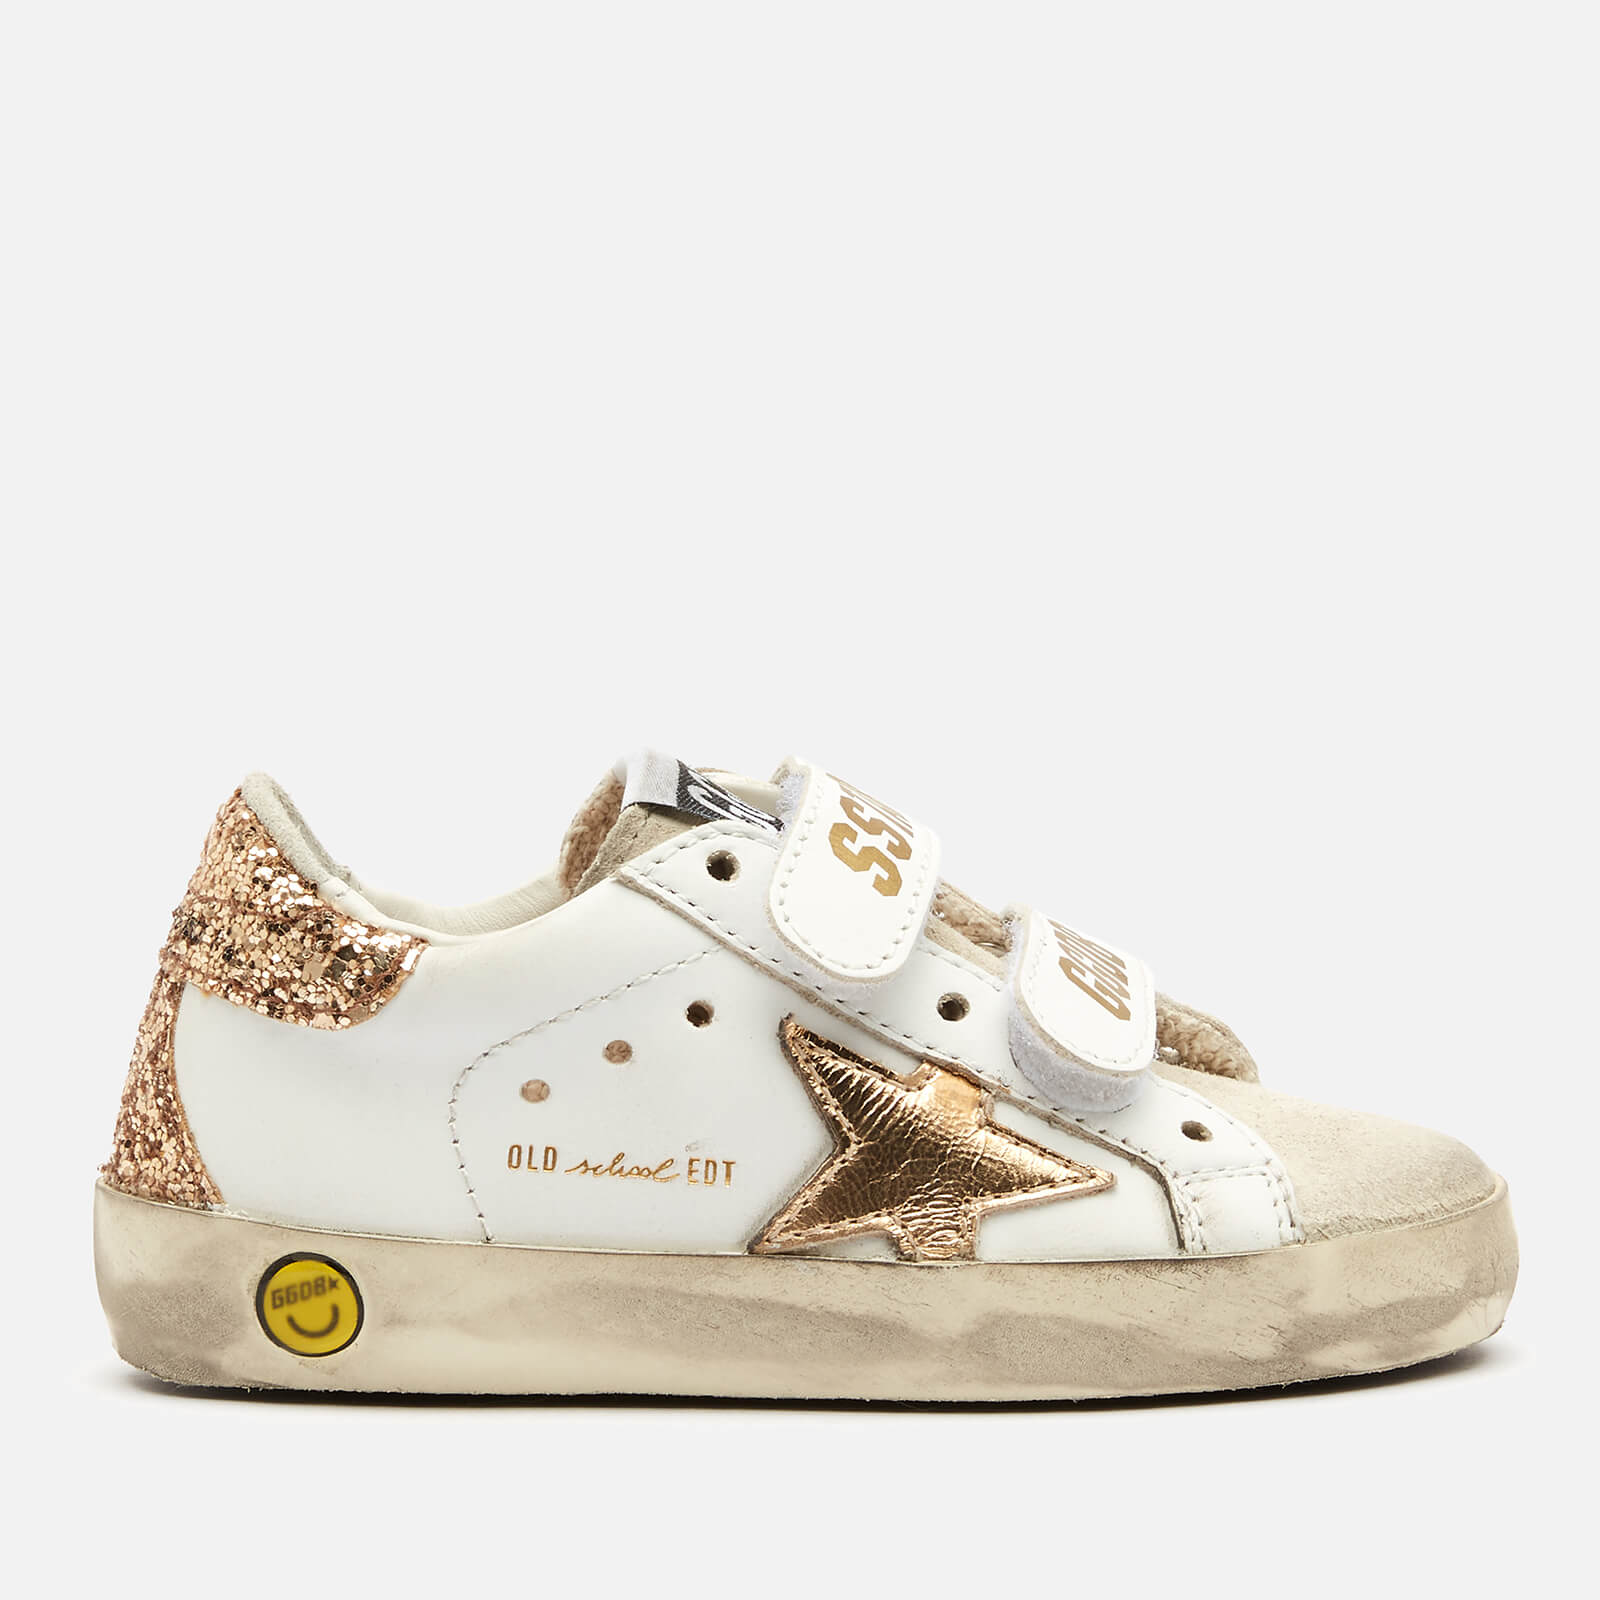 Golden Goose Toddlers' Suede Toe and Leather Old School Trainers - White/Ice/Gold - UK 5 Toddler